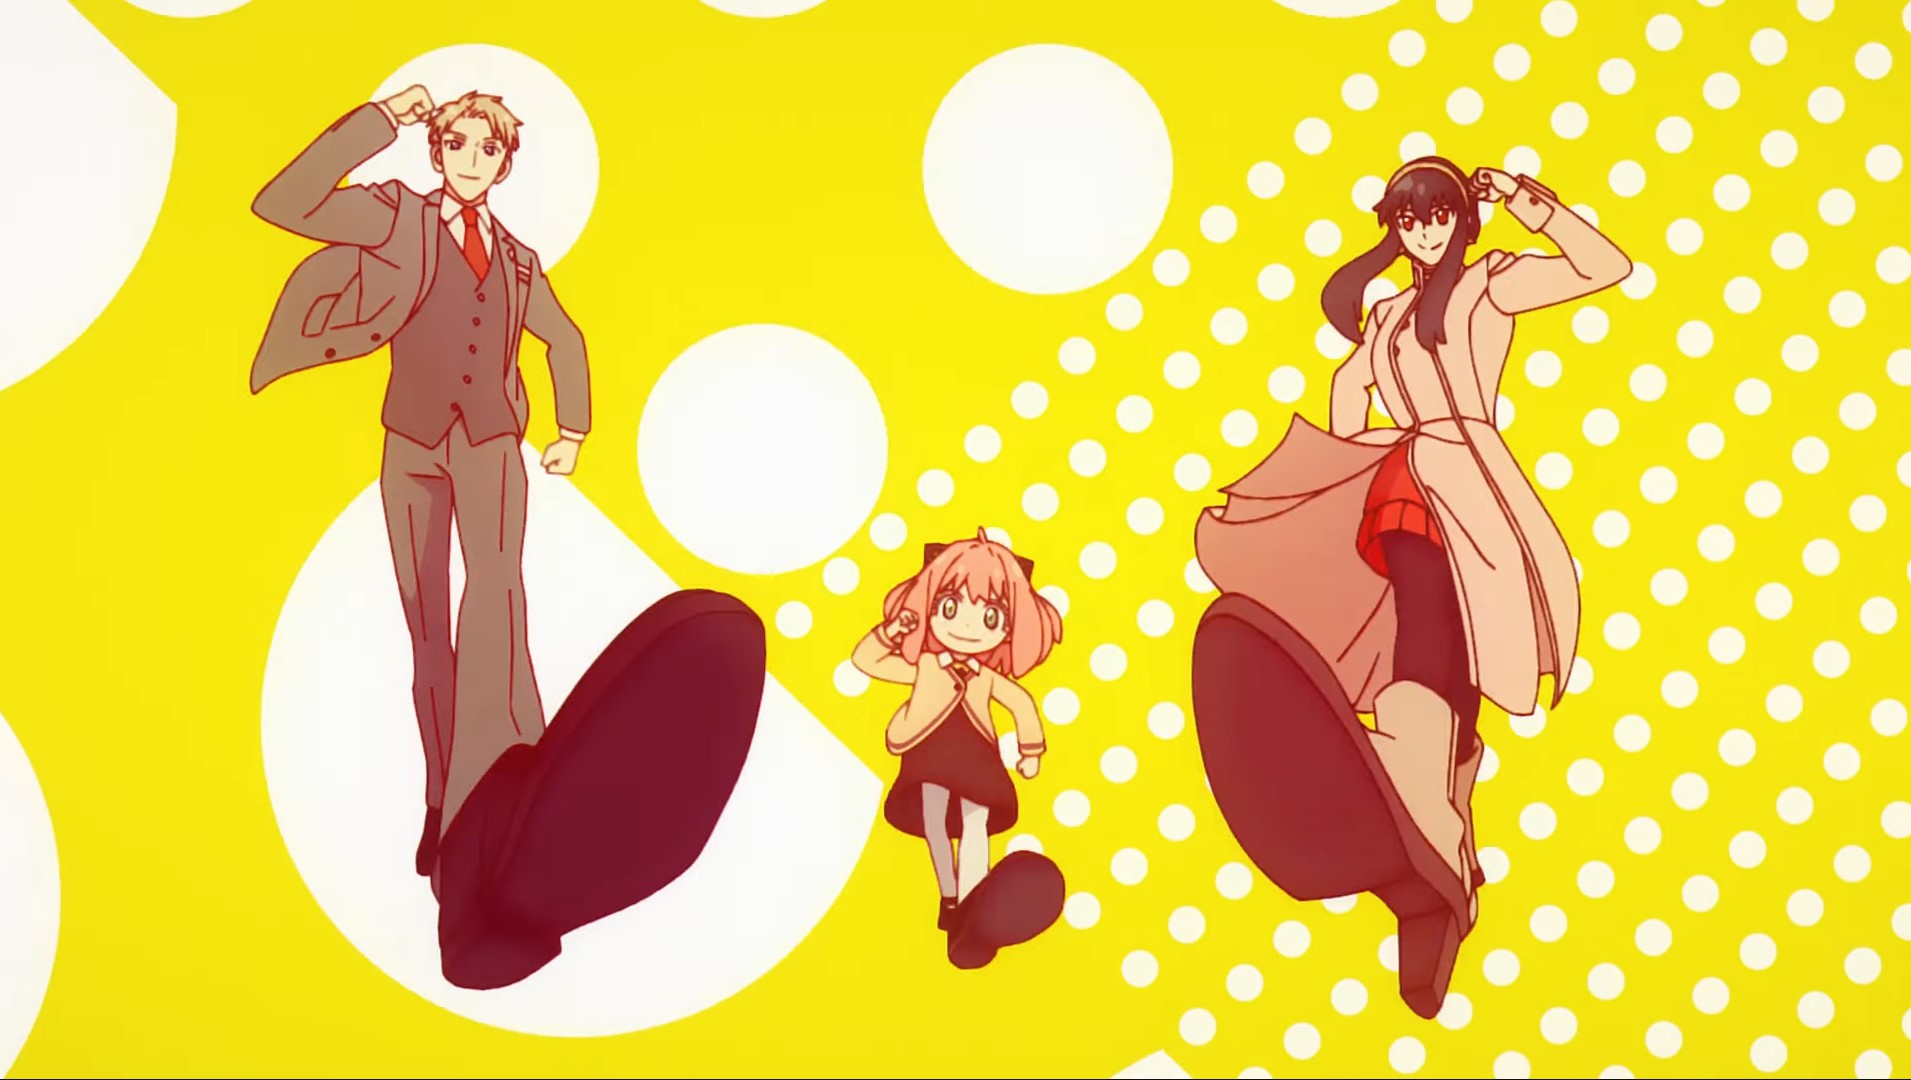 (L-R) Loid, Anya, and Yor Forger marching side-by-side in front of a yellow and white polka dot background in Spy x Family season 2.